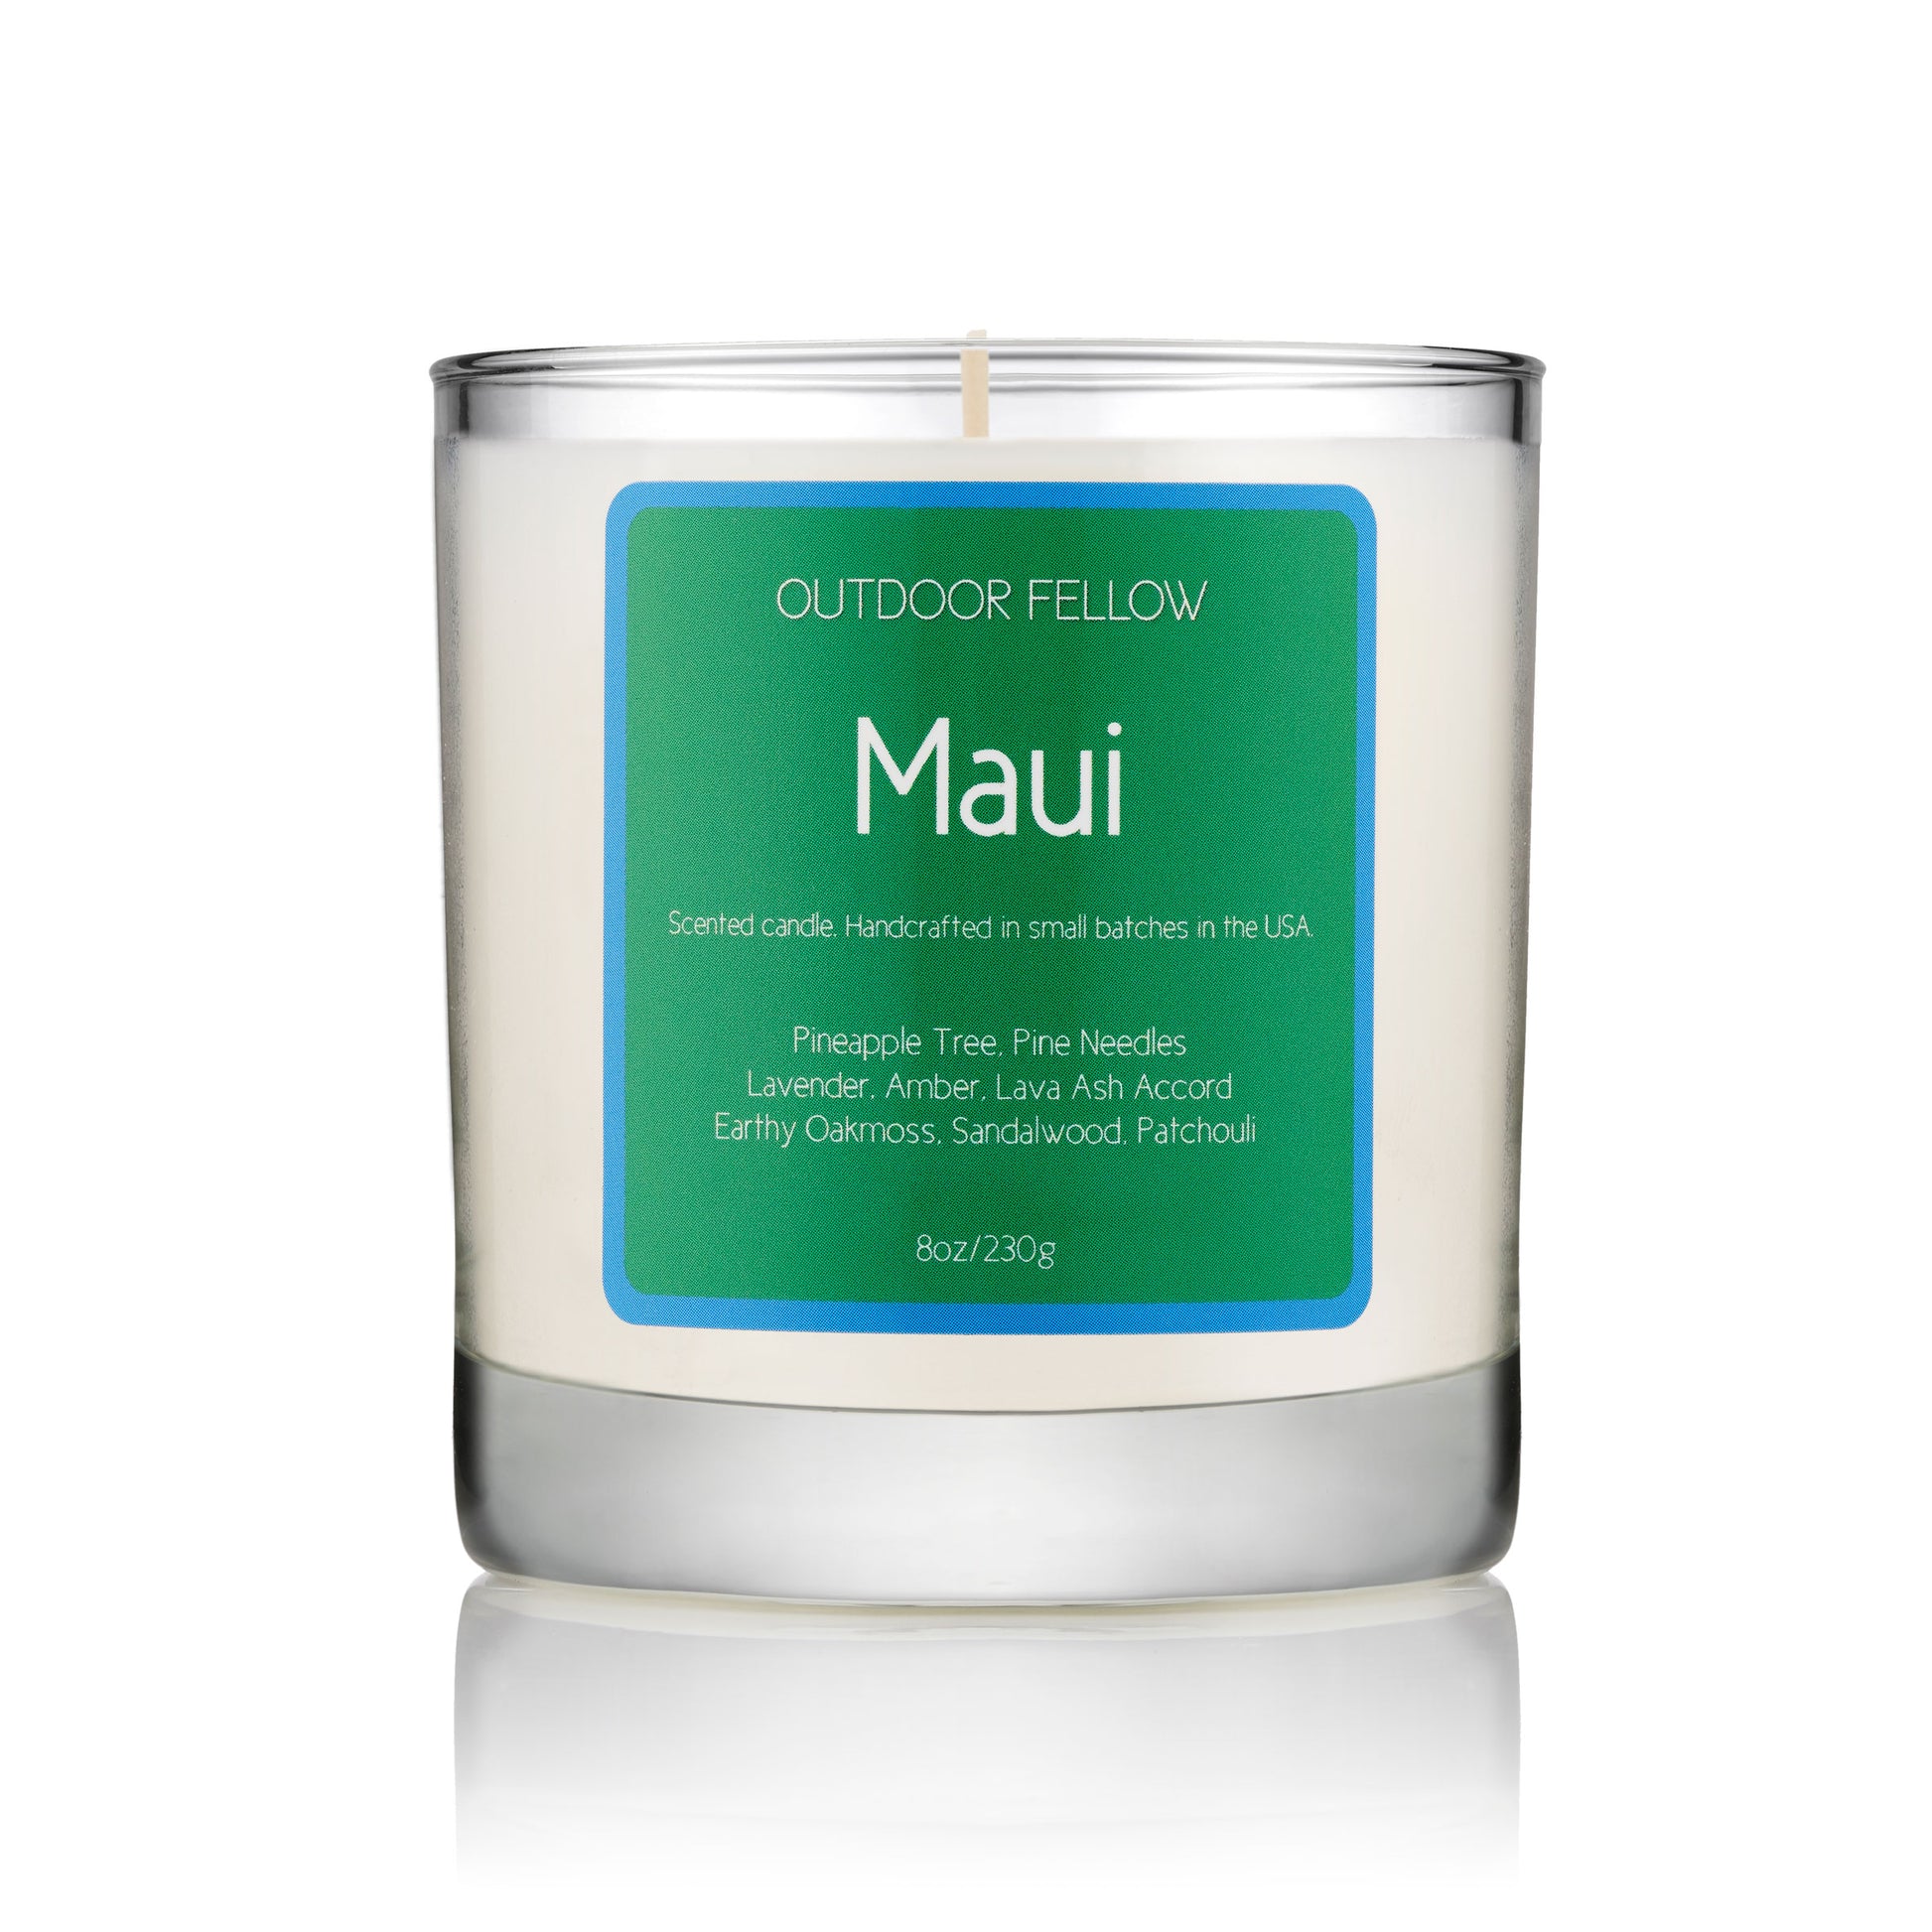 Maui scented candle on white background